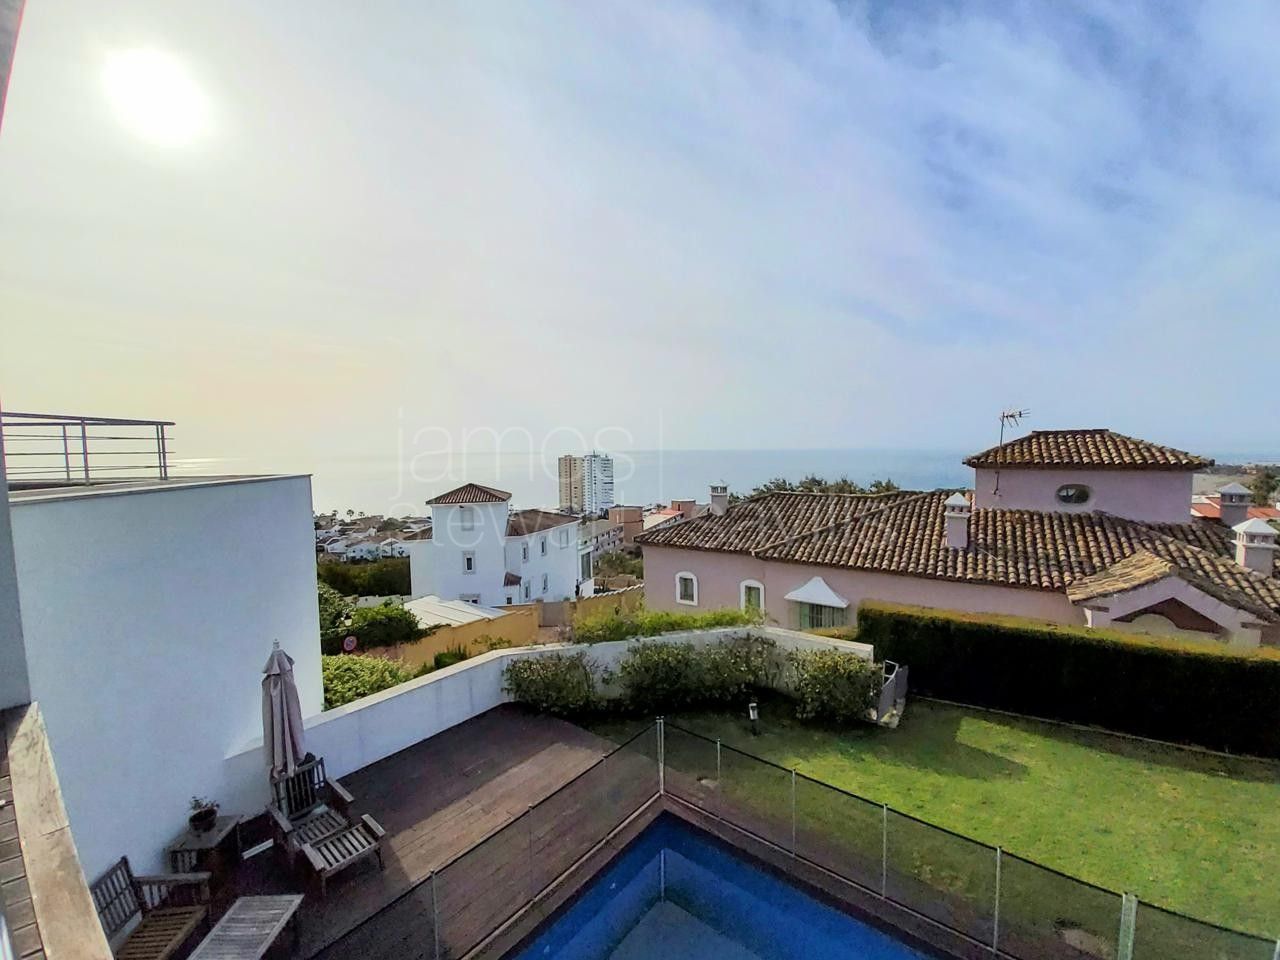 Contemporary villa with elevated sea views from Estepona to Gibraltar